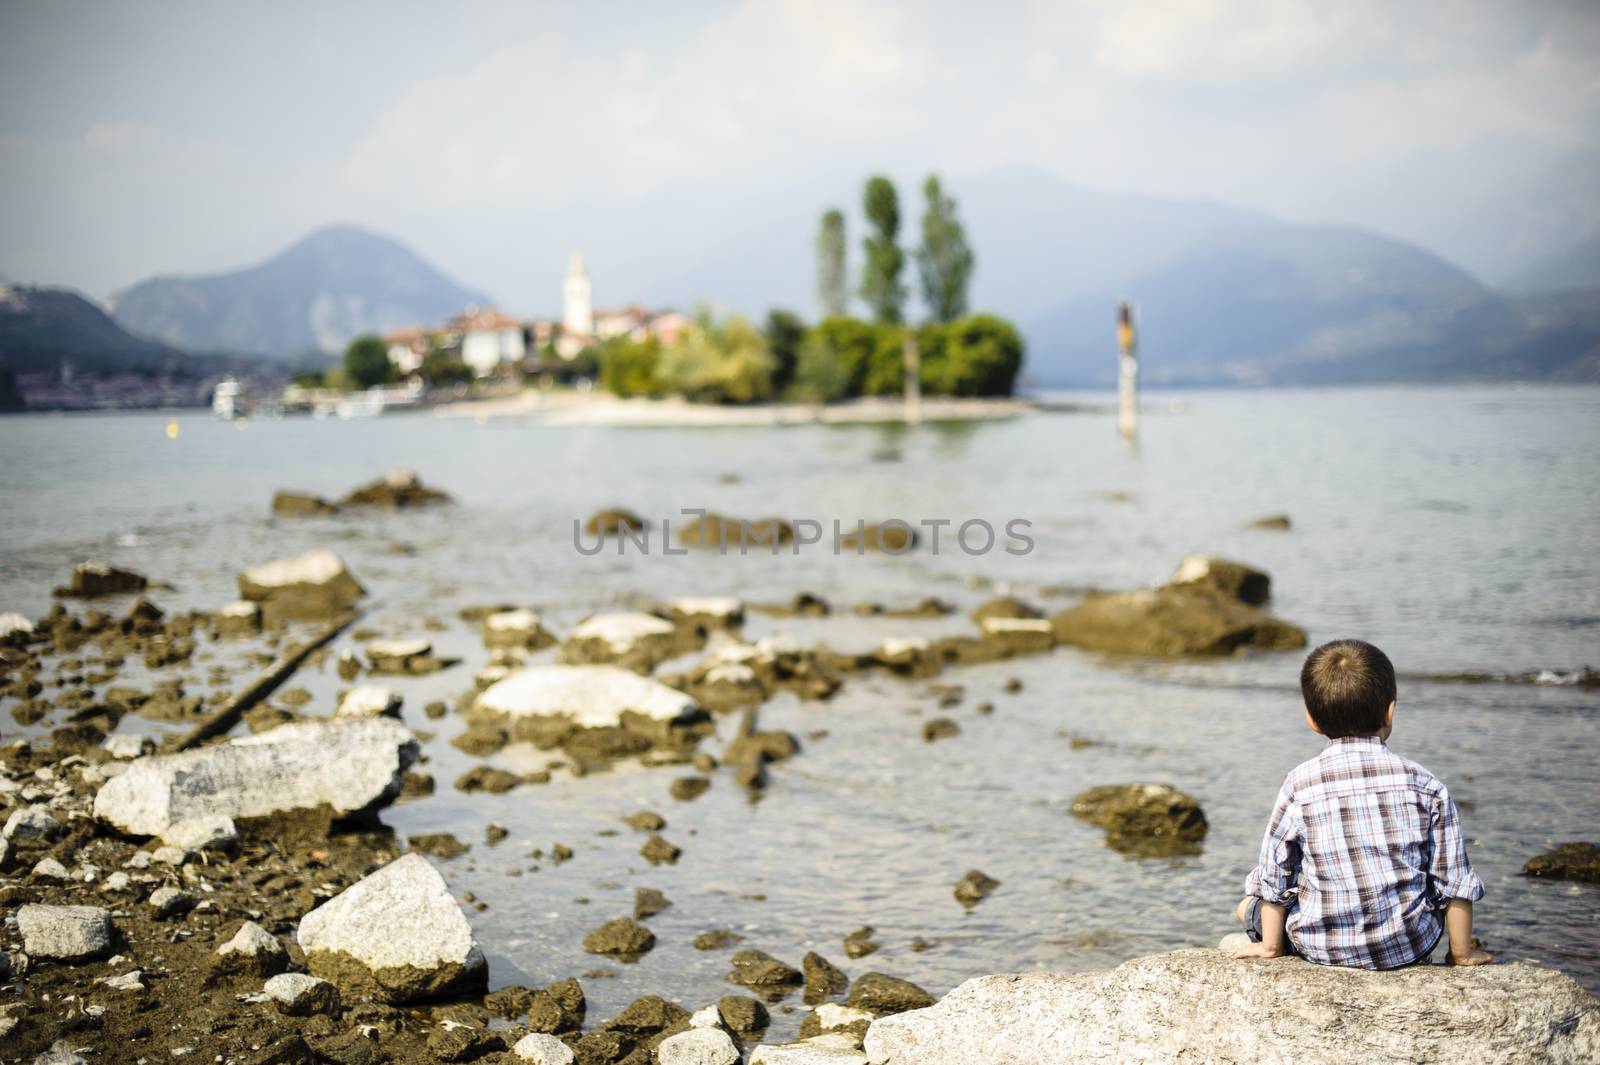 Italy, Piedmont, Isola Bella, Lago Maggiore, a child sitting on a rock looking towards infinite horizon